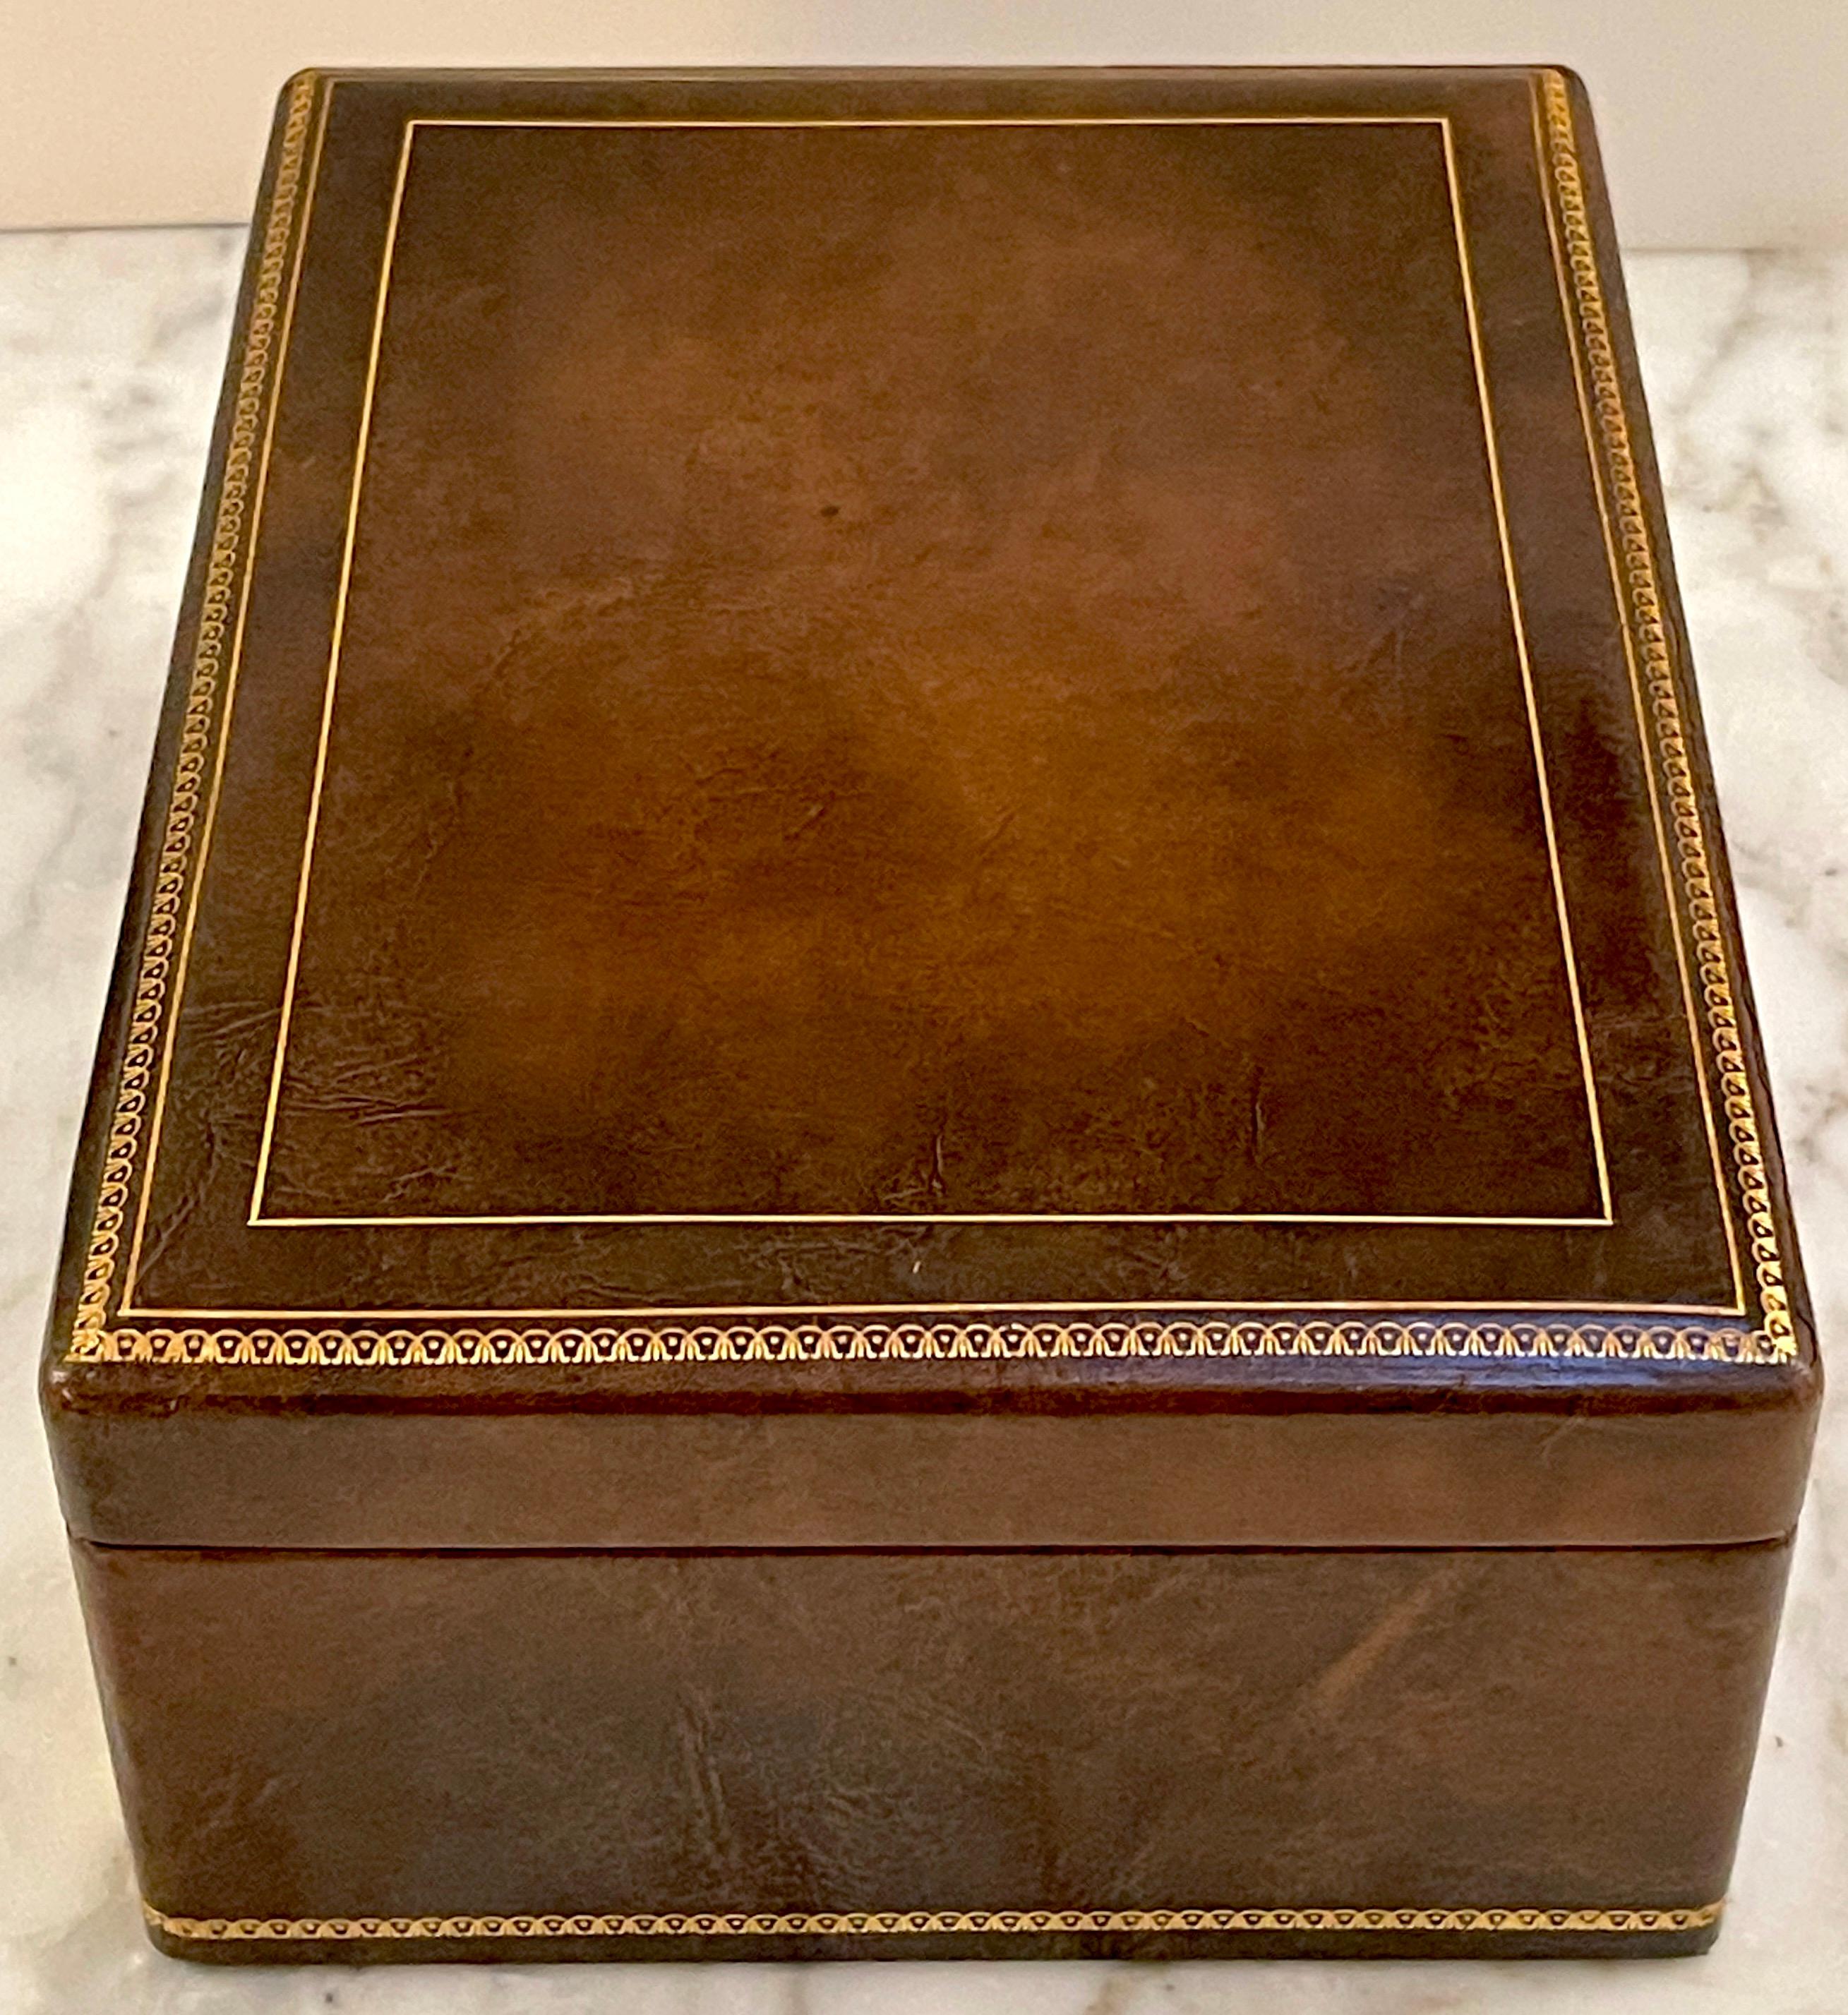 20th Century Italian Midcentury Brown Leather Neoclassical Humidor with Gilt Tooling For Sale